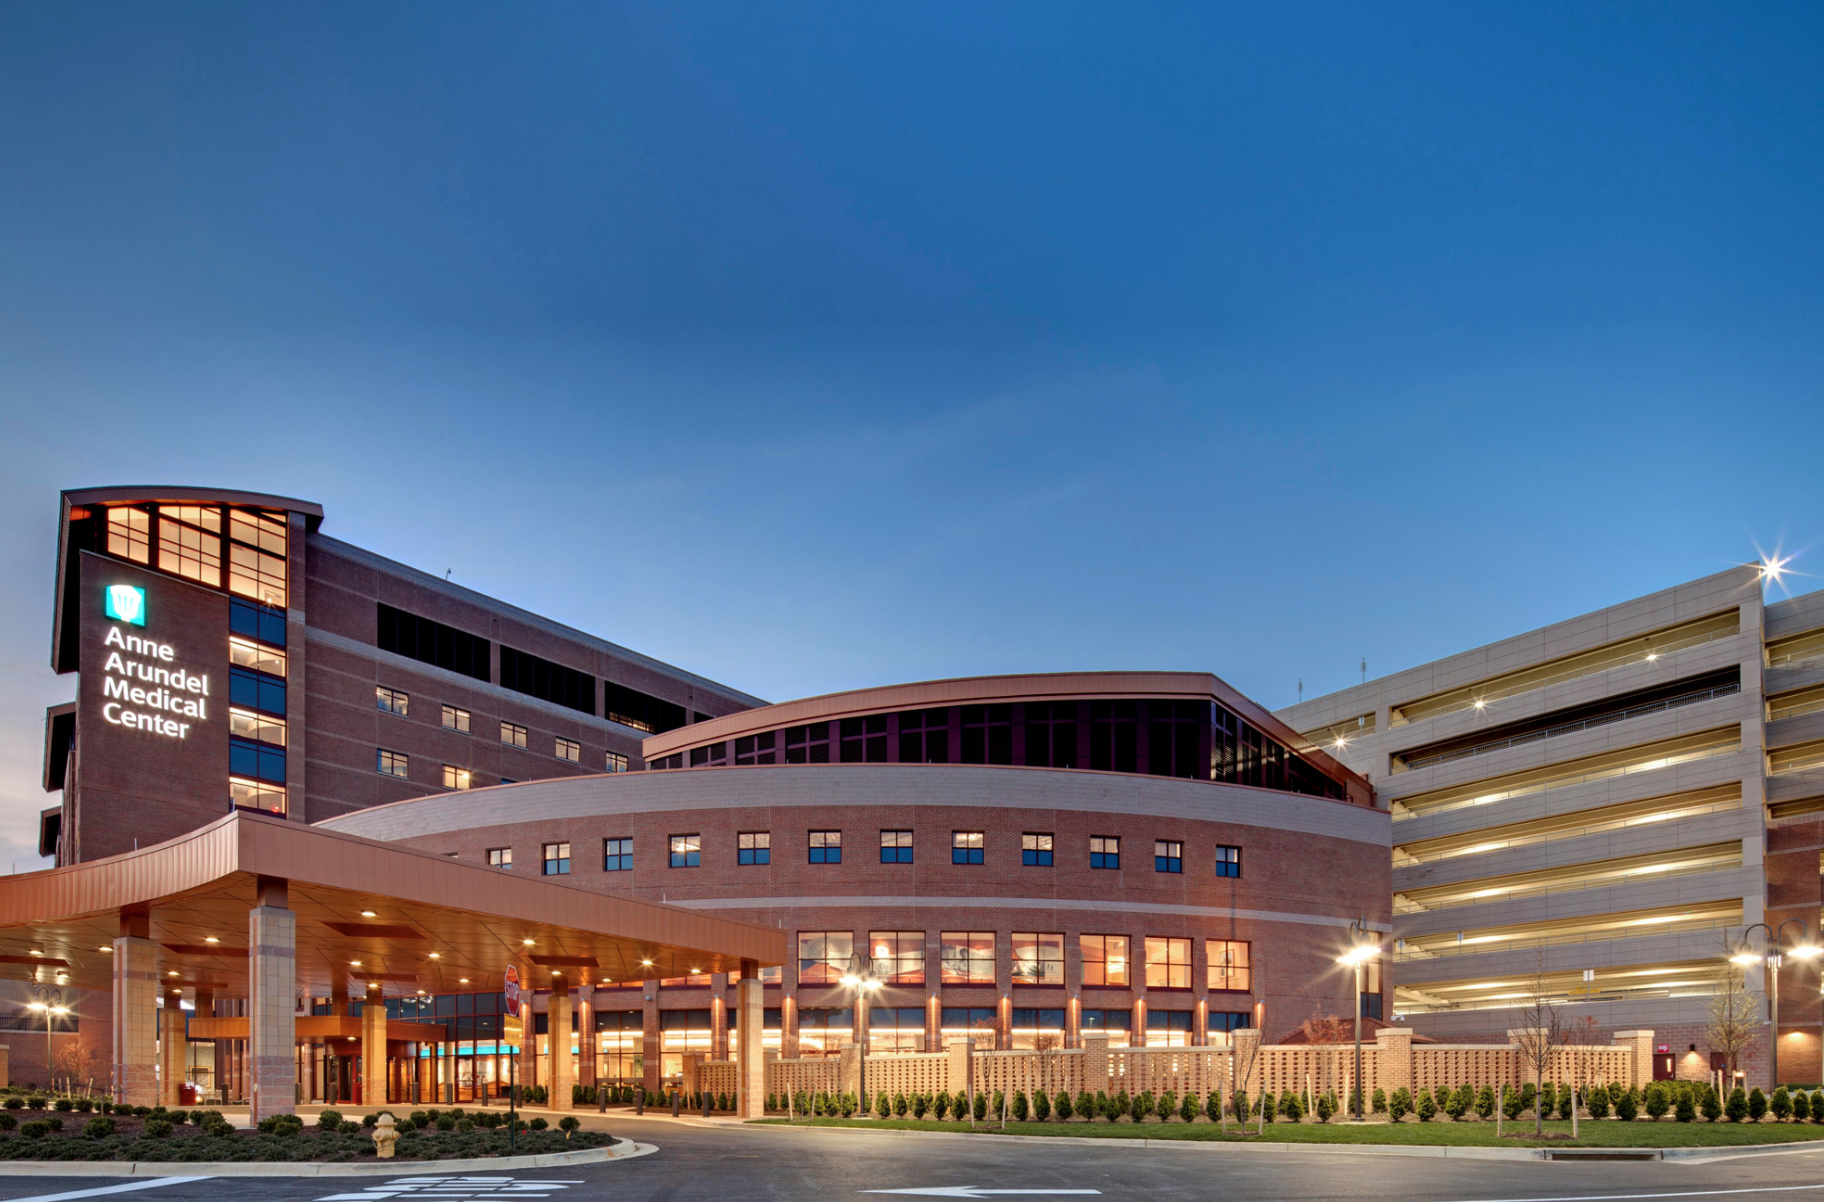 An image in the evening of the exterior of Anne Arundel Medical Center